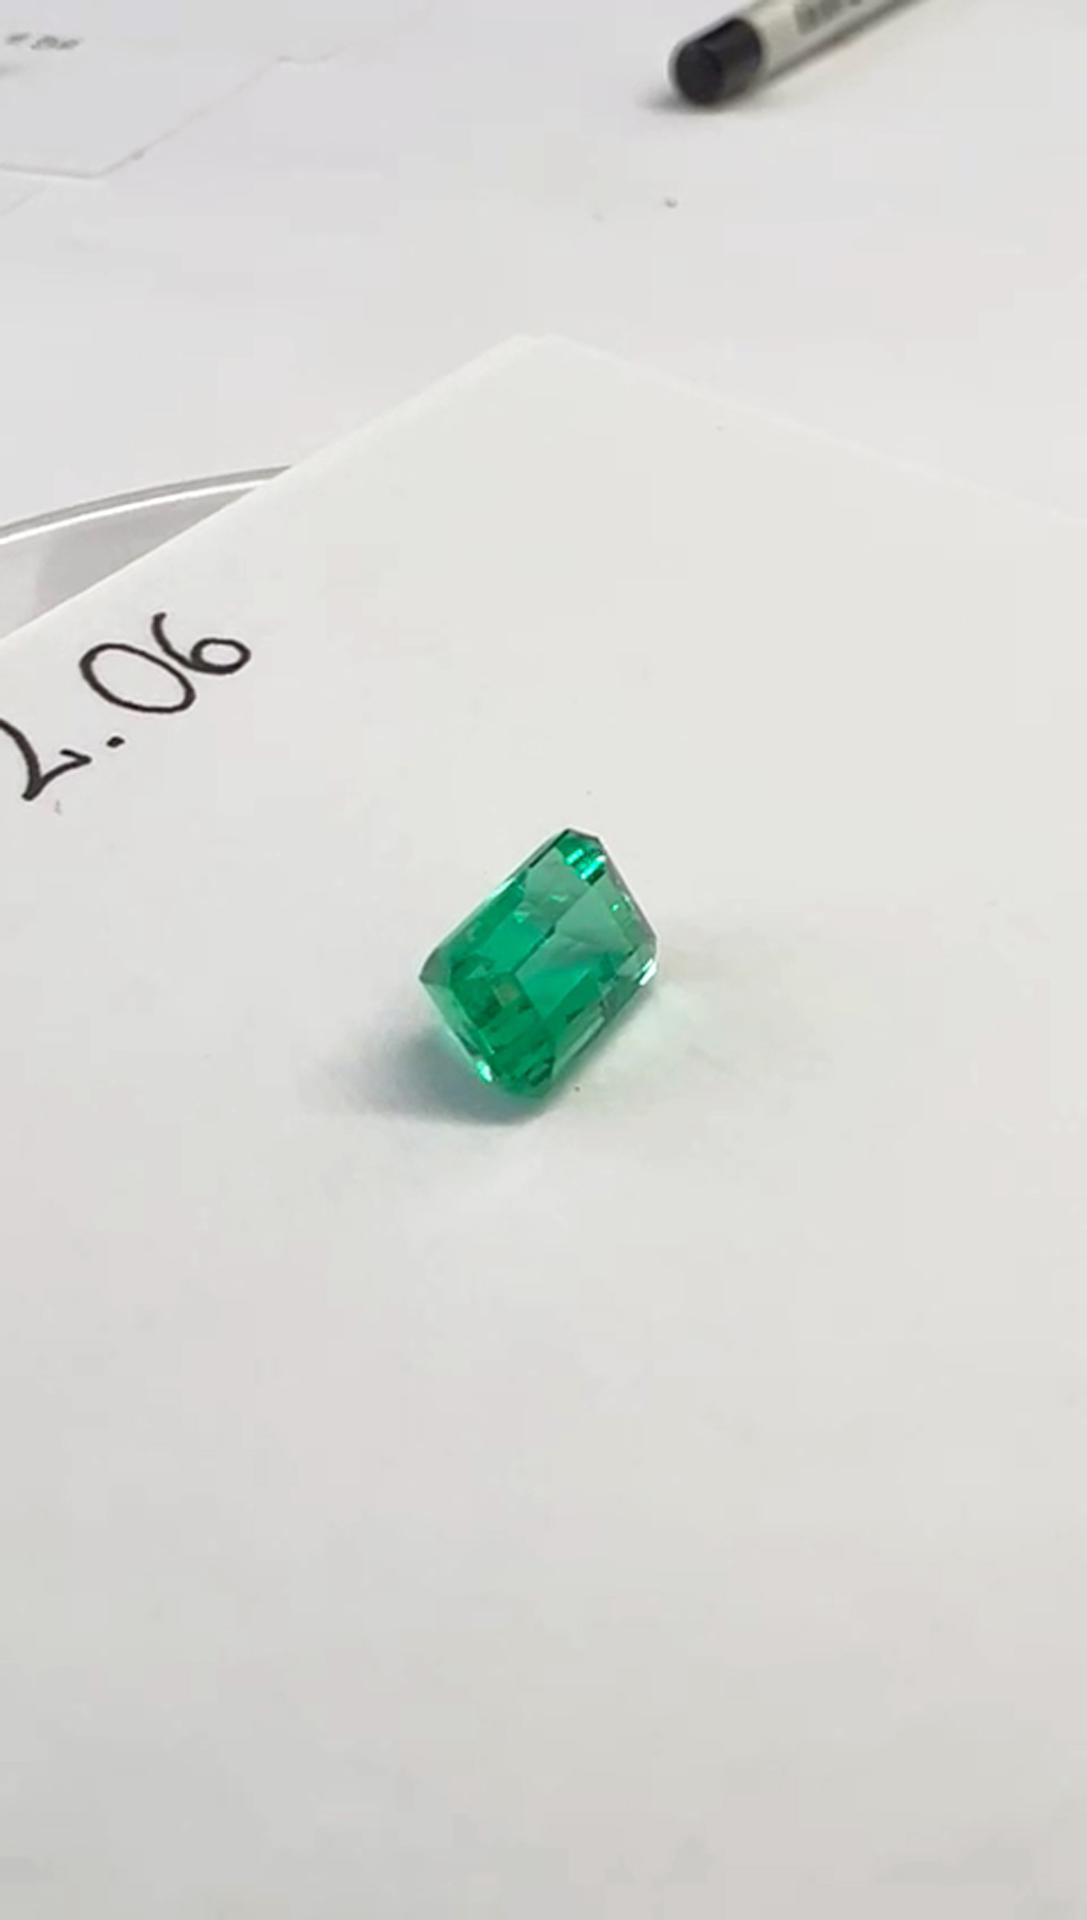 2.06 Ct. Colombian Emerald ( Exceptional)